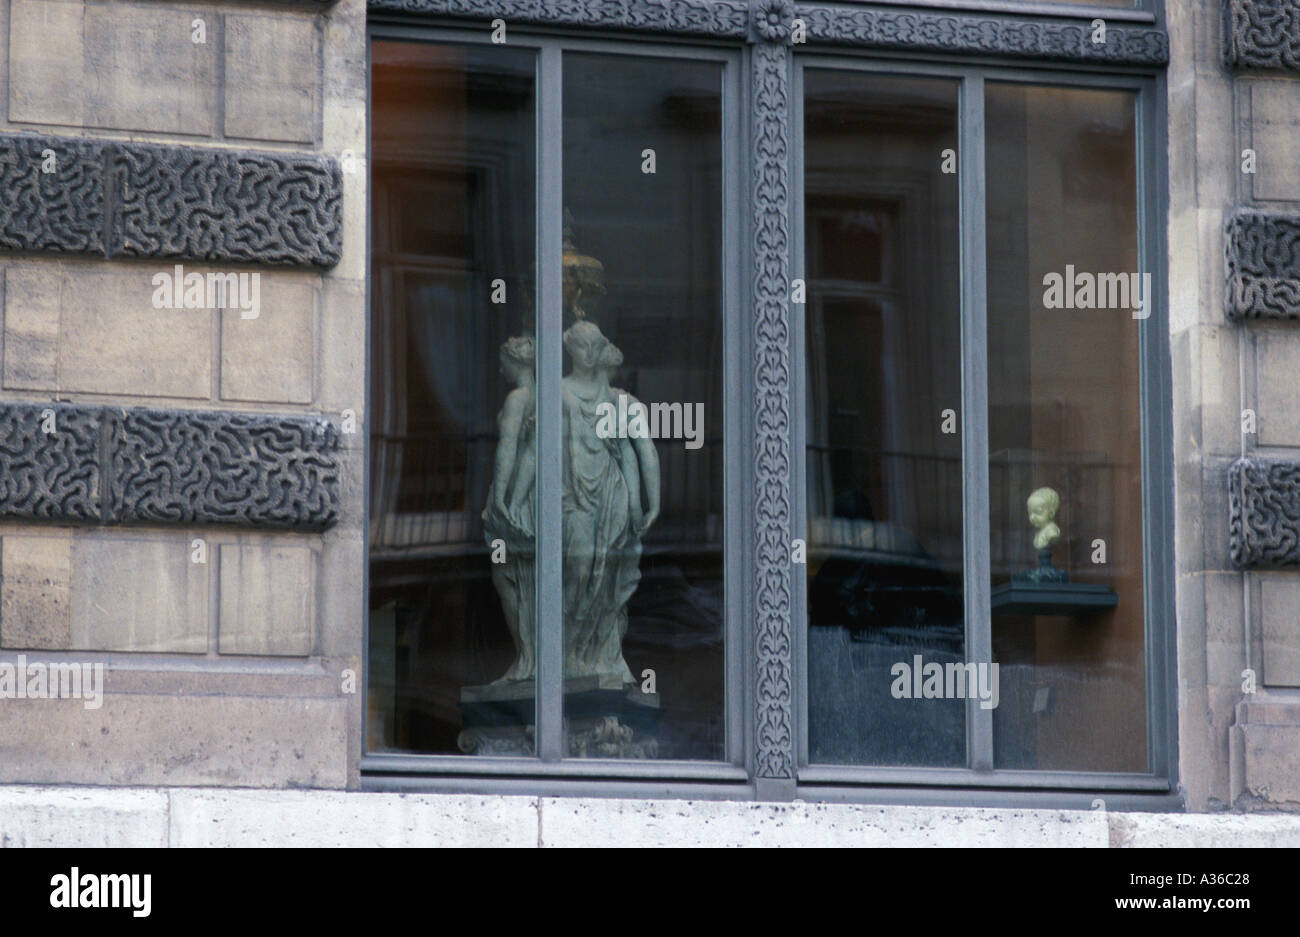 Sculptures in window of the Louvre Stock Photo